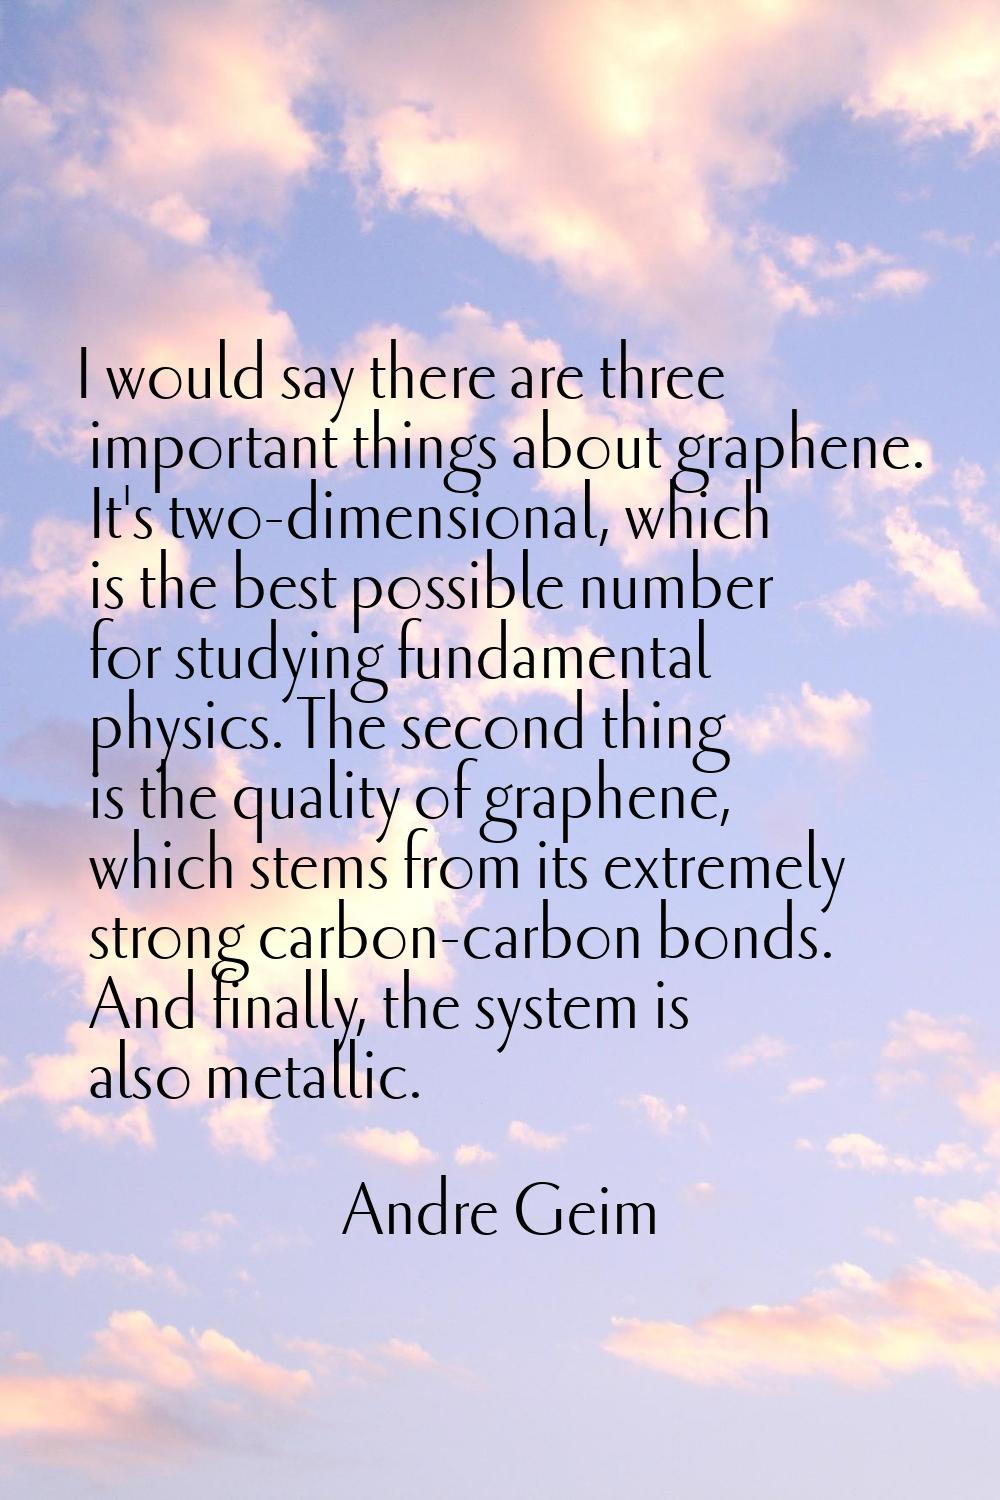 I would say there are three important things about graphene. It's two-dimensional, which is the bes